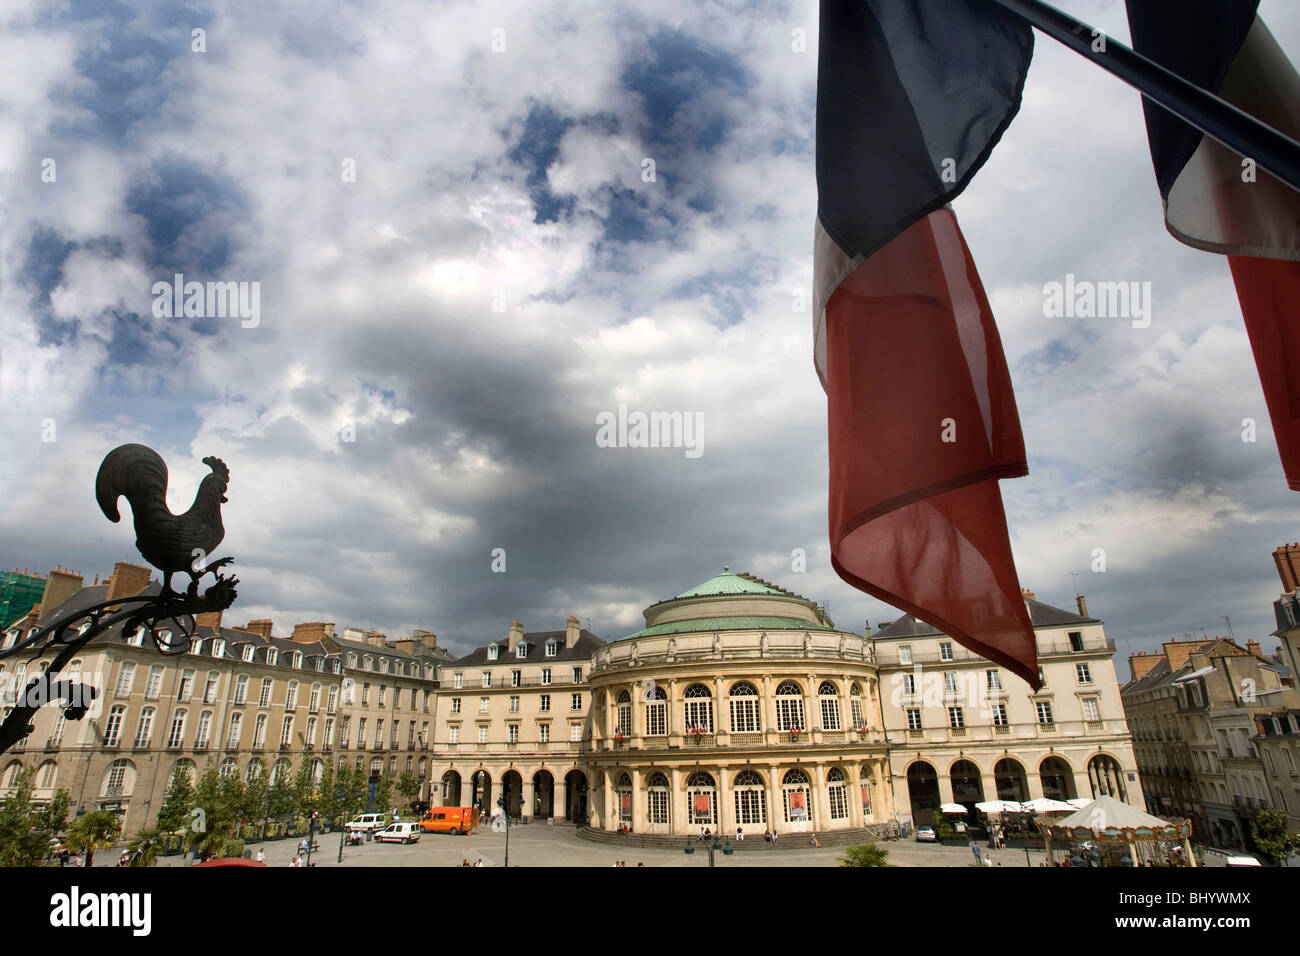 Rennes (35) : townhall square Foto Stock